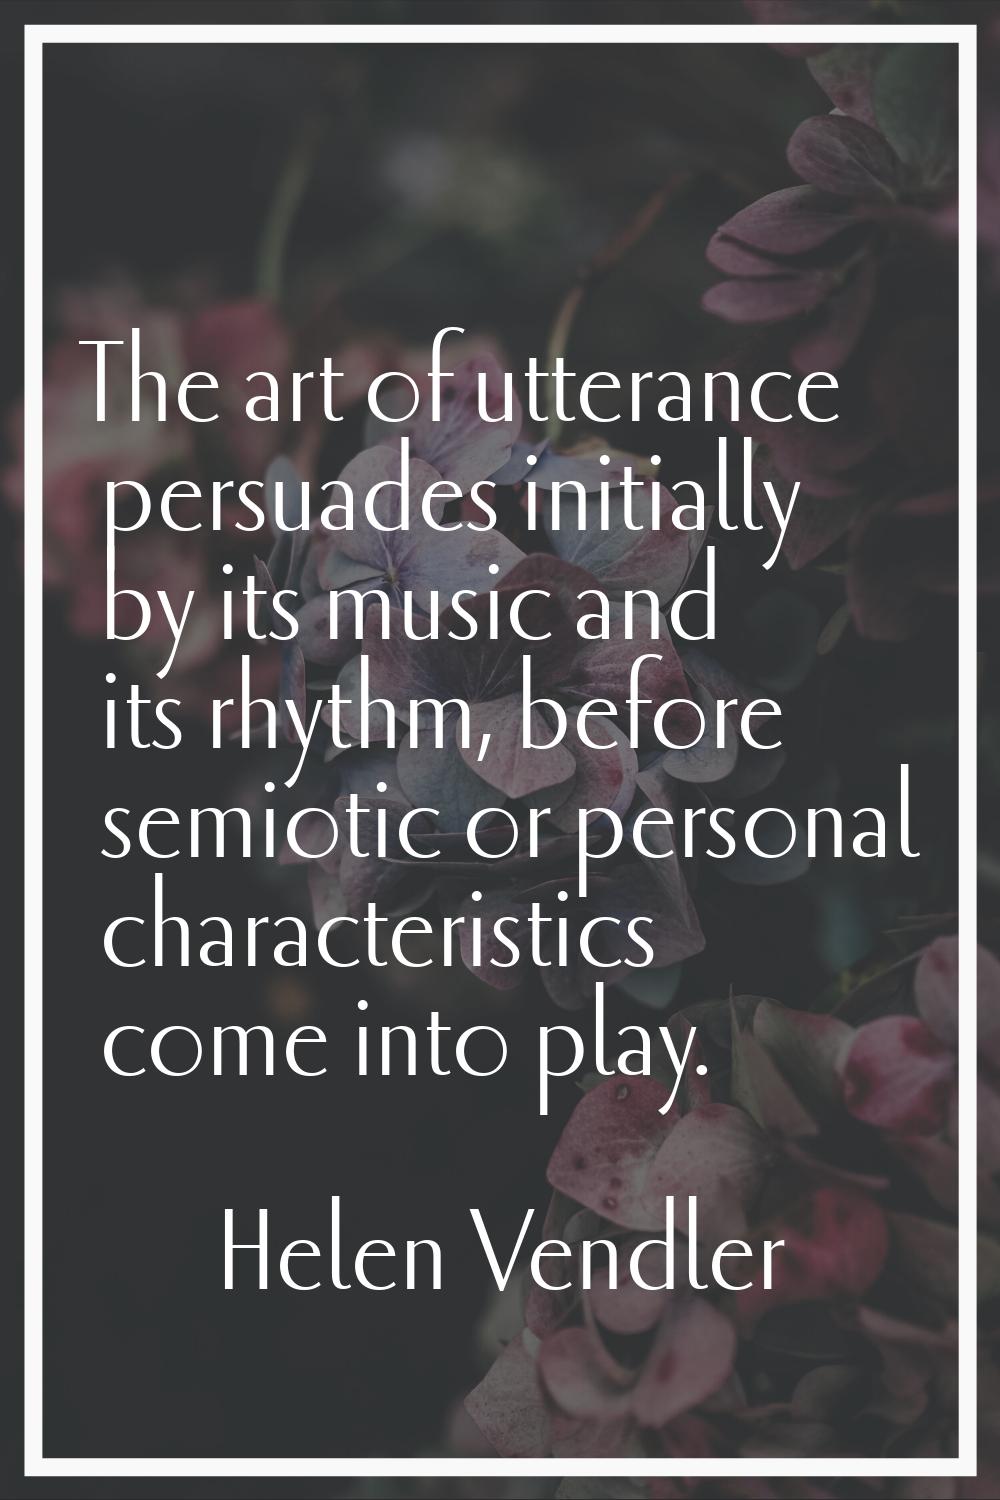 The art of utterance persuades initially by its music and its rhythm, before semiotic or personal c